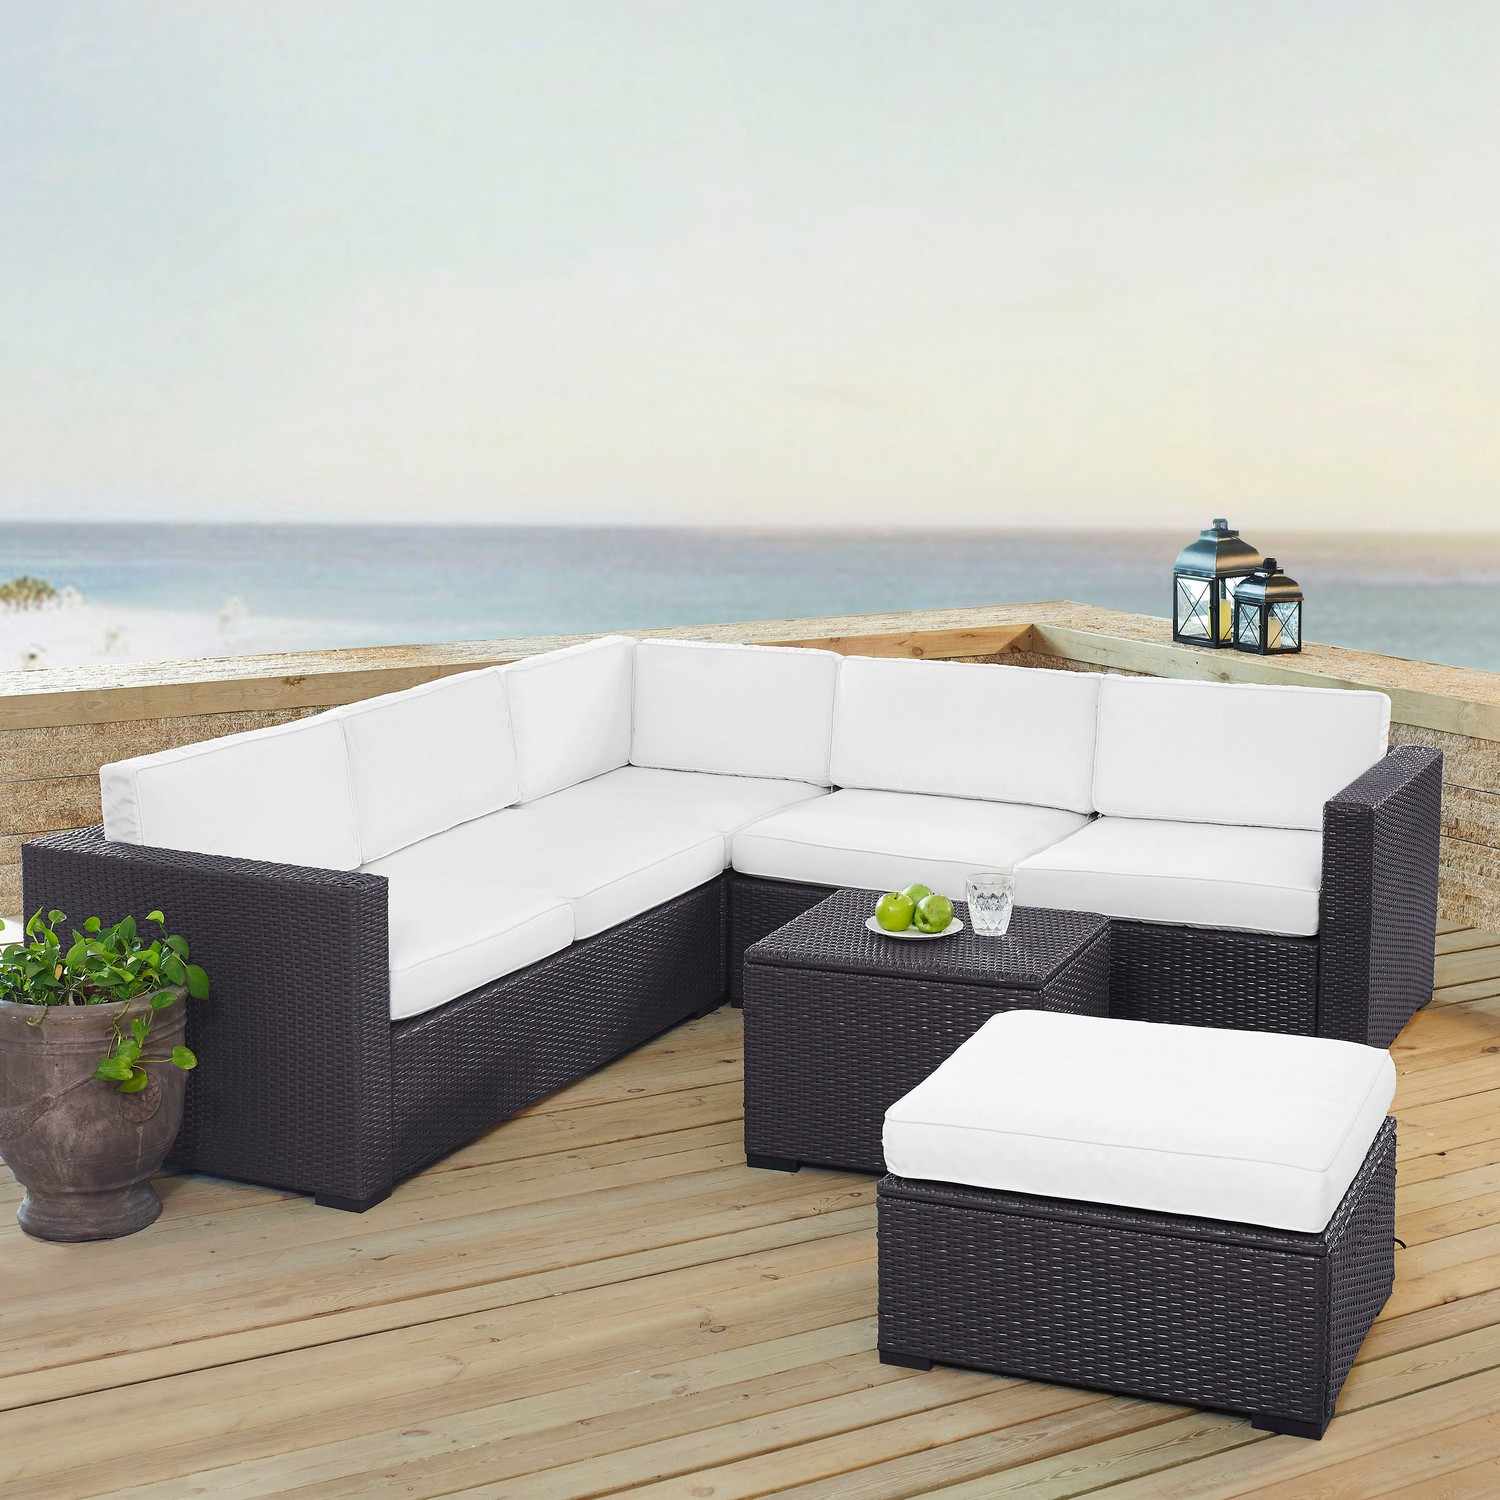 Crosley Biscayne 5-PC Outdoor Wicker Sectional Set - 2 Loveseats, Corner Chair, Coffee Table, Ottoman - White/Brown